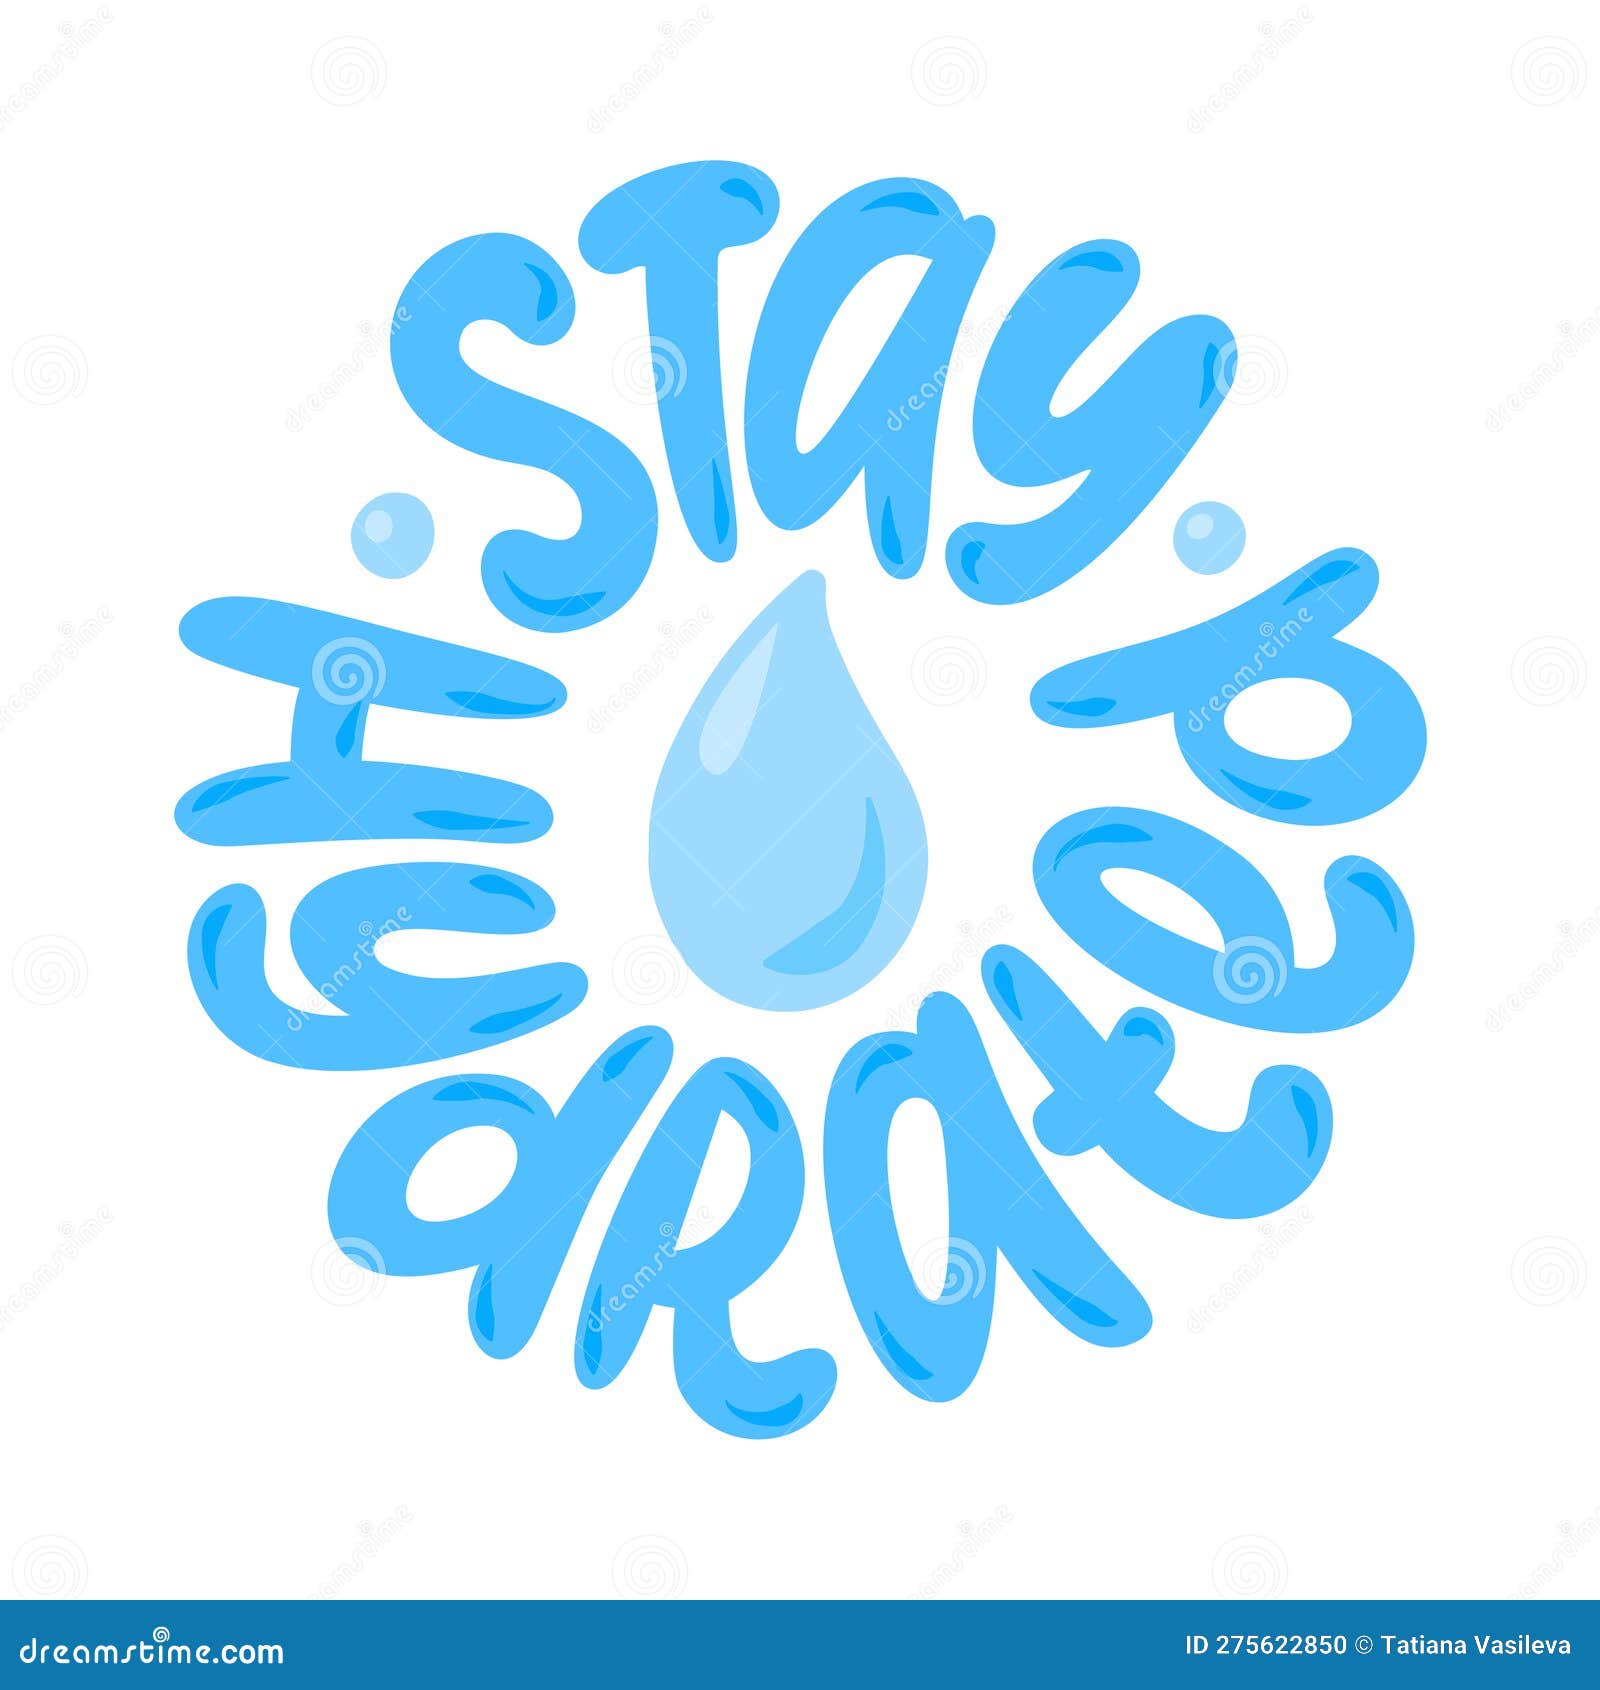 stay hydrated logo stamp quote. modern  text stay hydrated. hydrate yourself.  